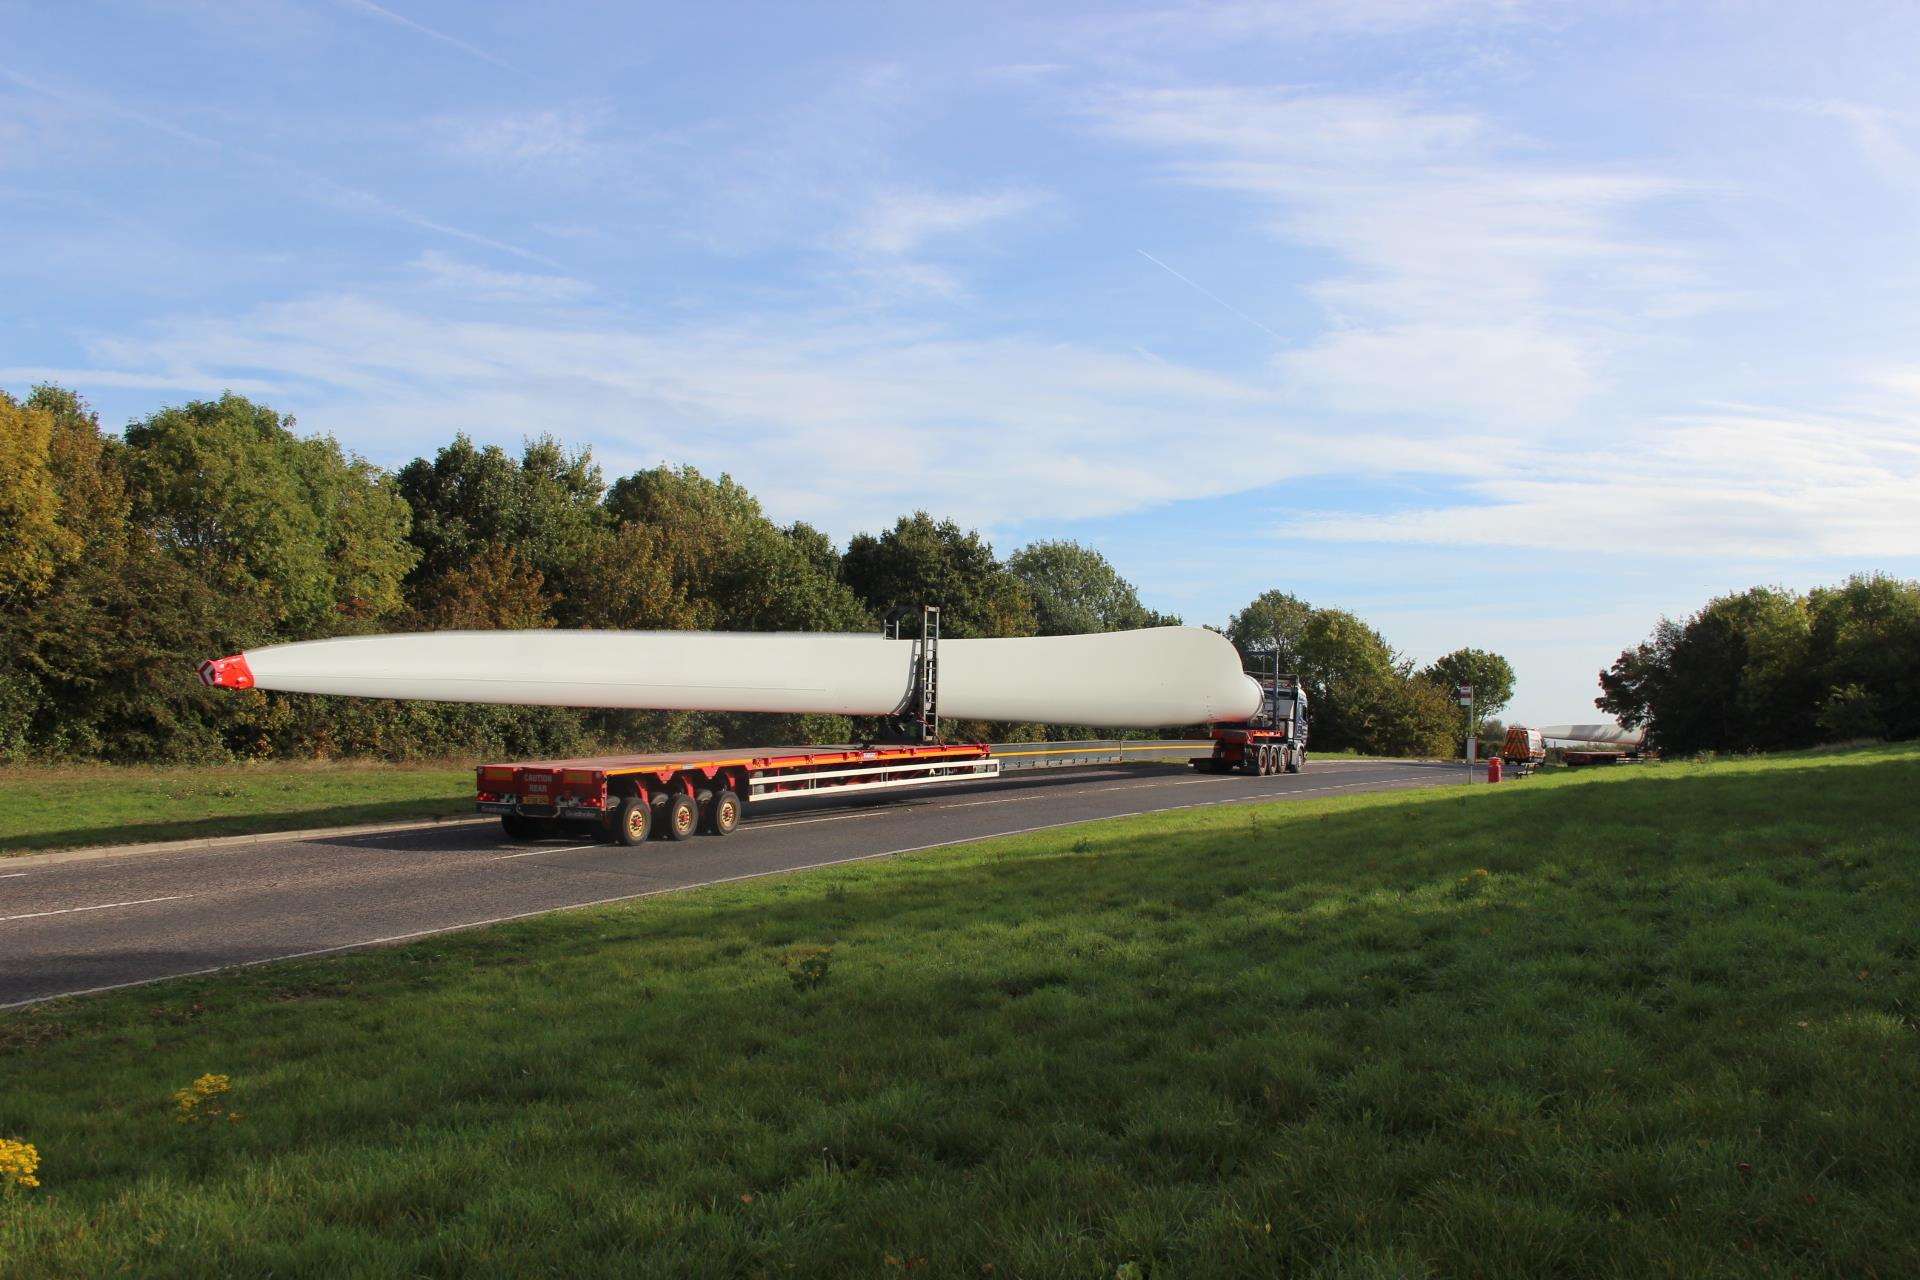 Turbine blade on its way to New Rides Farm, Eastchurch on the Isle of Sheppey (4761106)